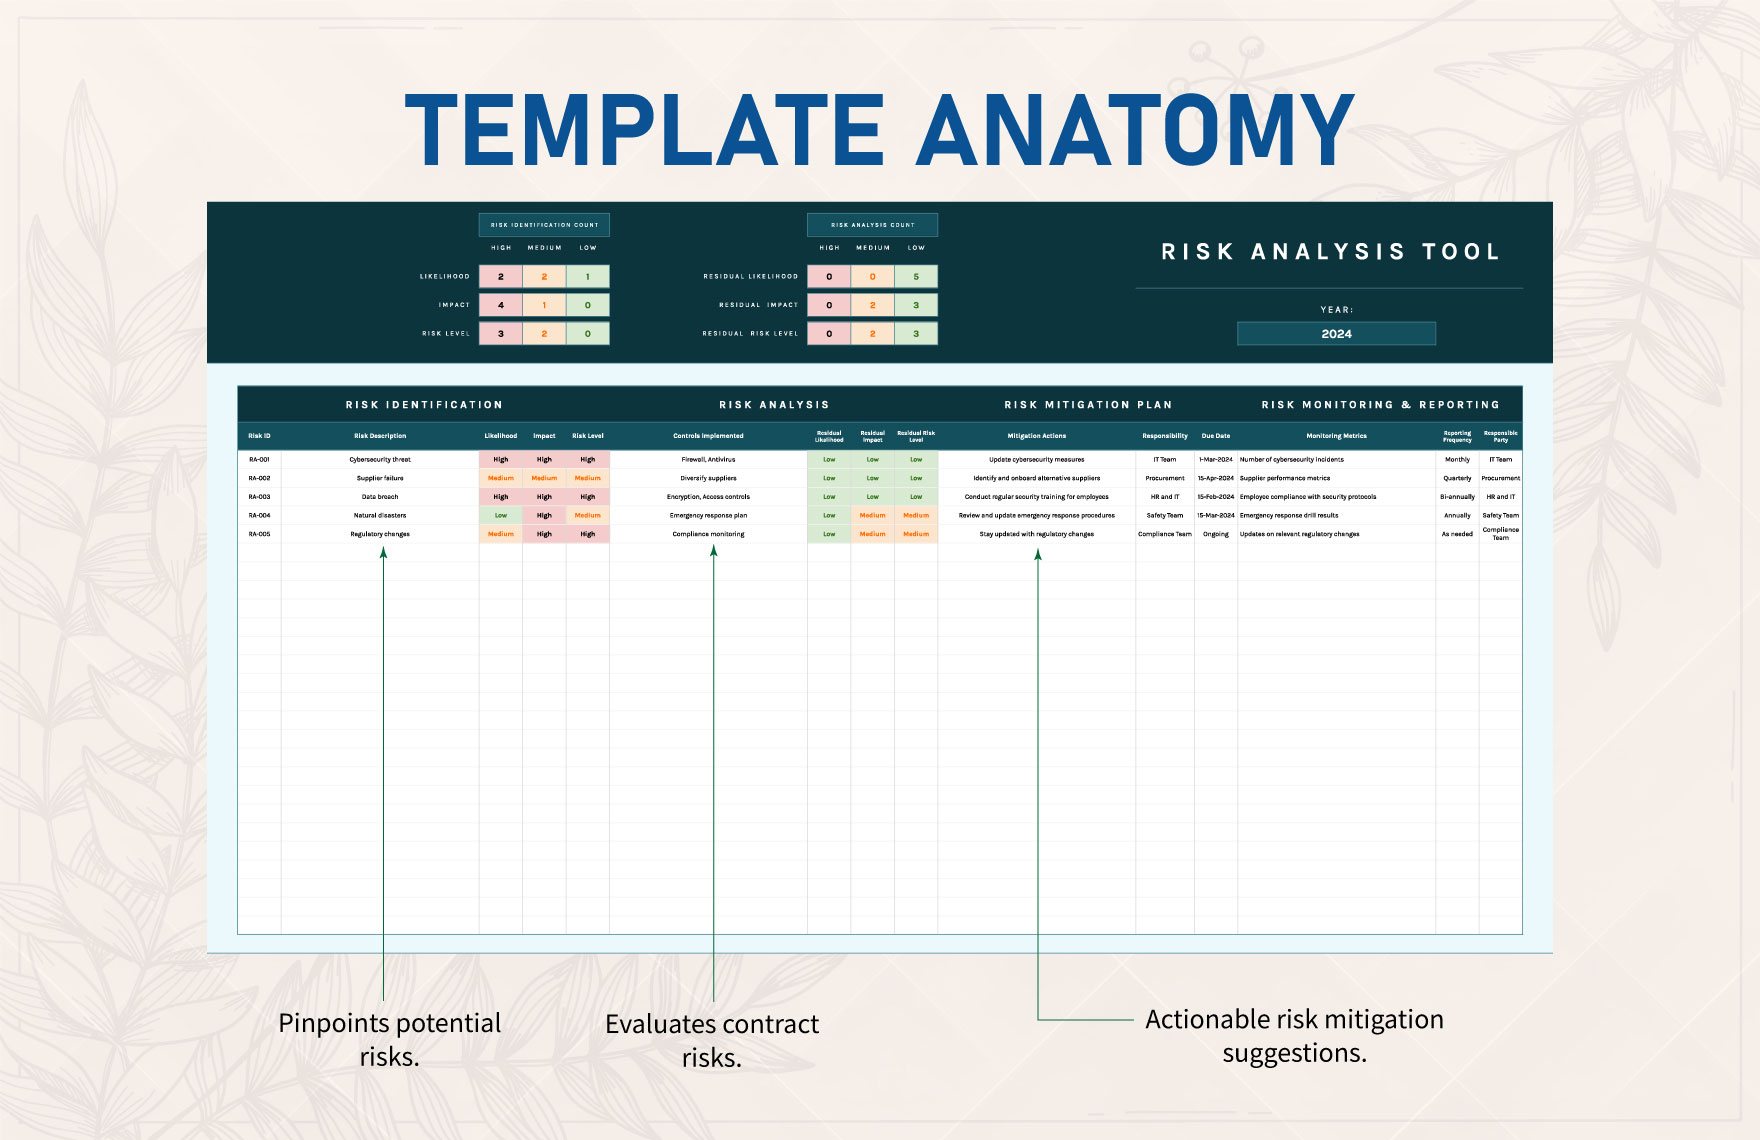 Sales Contract Risk Analysis Tool Template